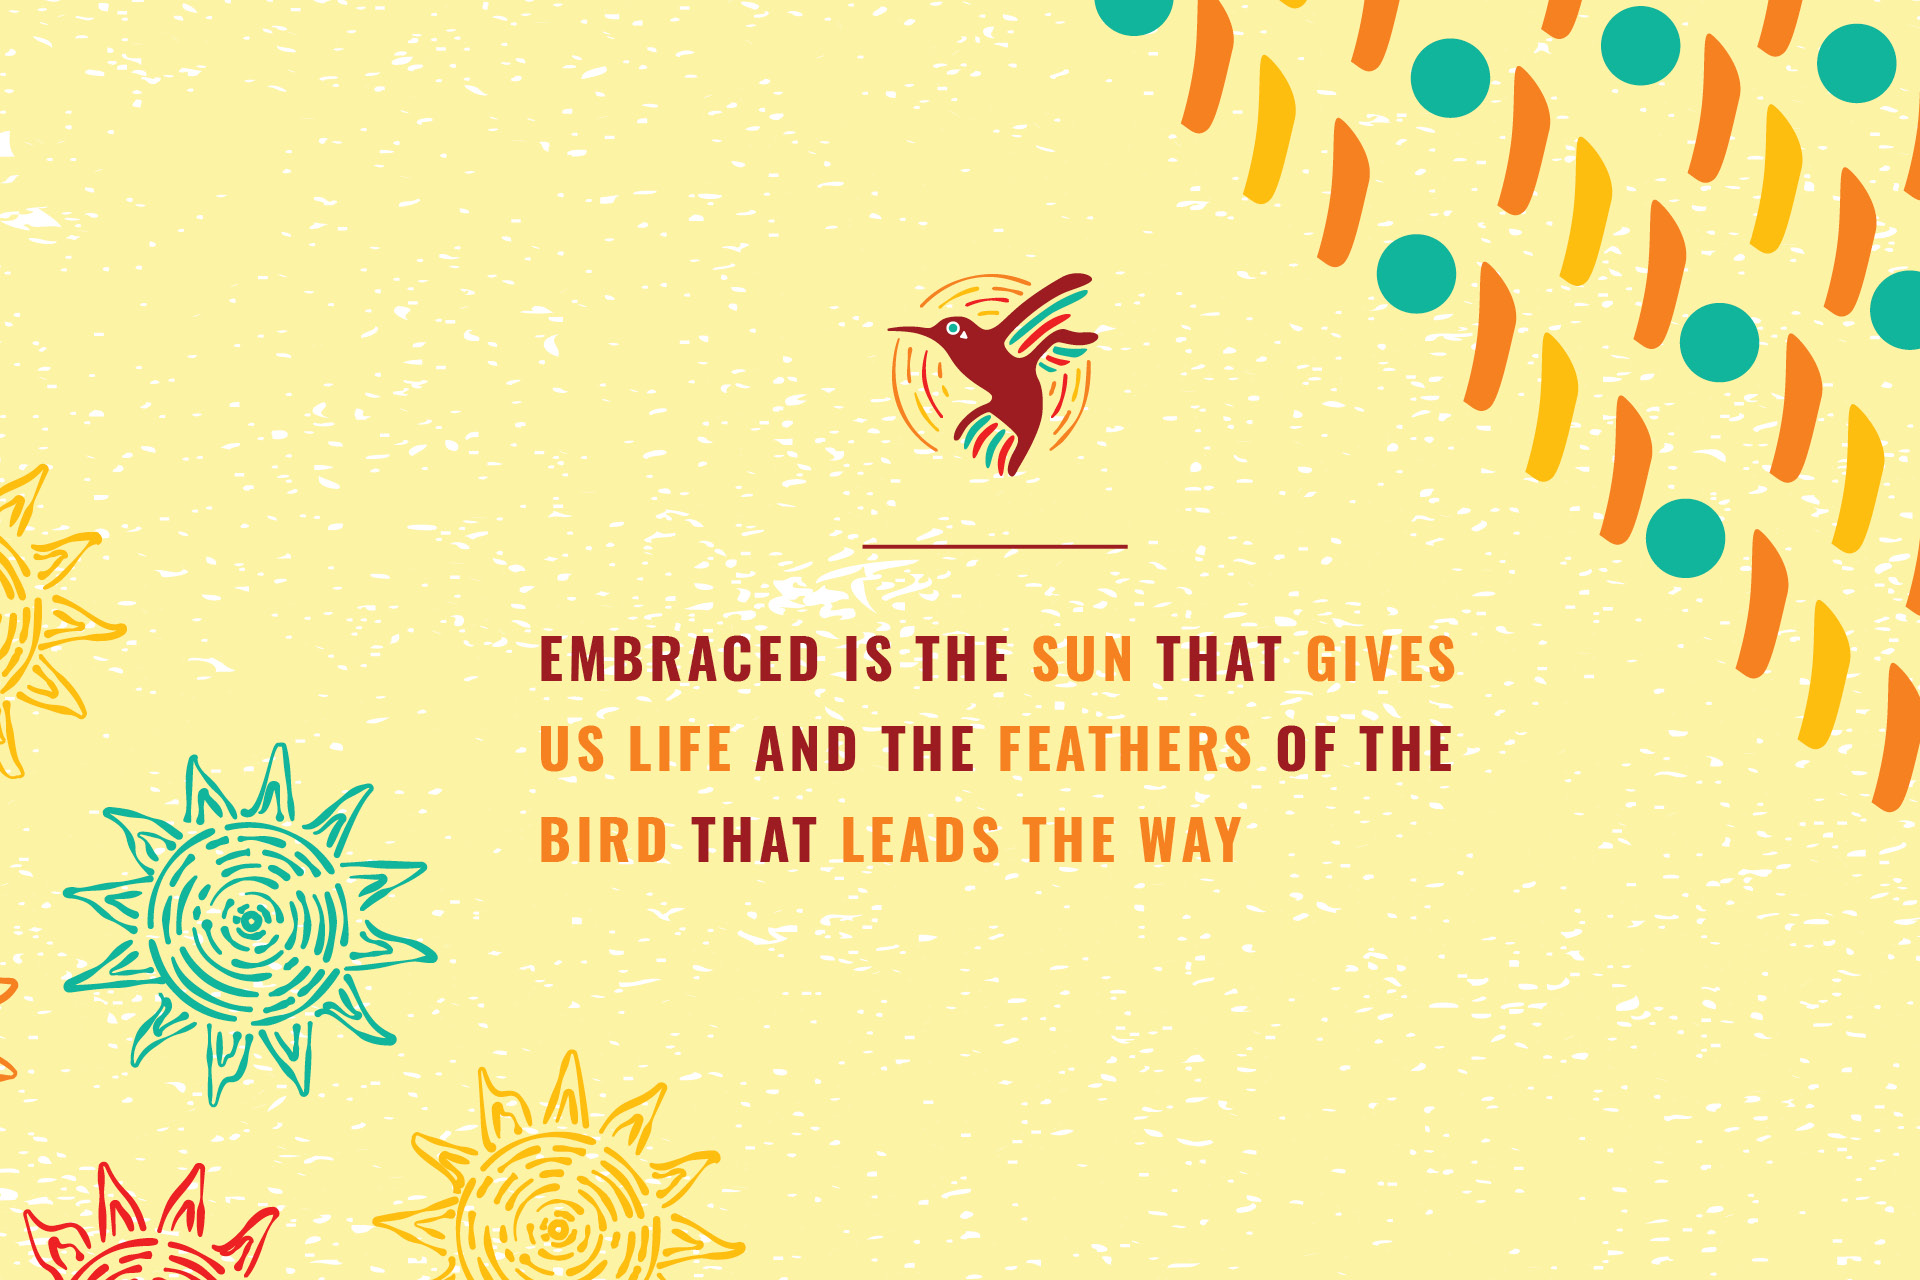 Embraced is the sun that gives us life and the feathers of the bird that lead the way